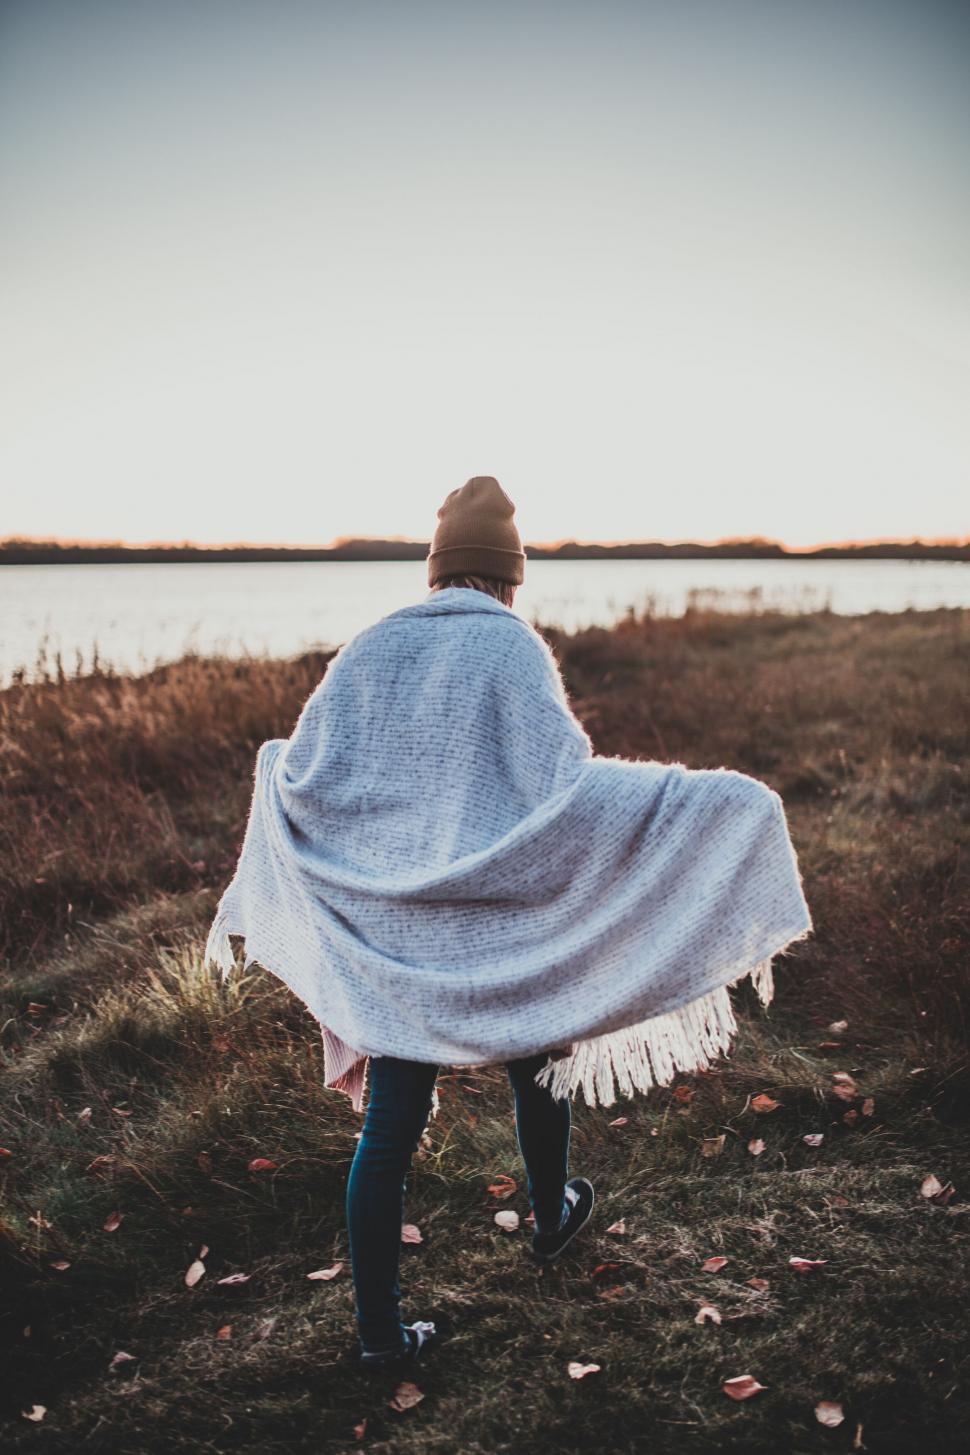 Free Image of Individual wrapped in a blanket at sunset 